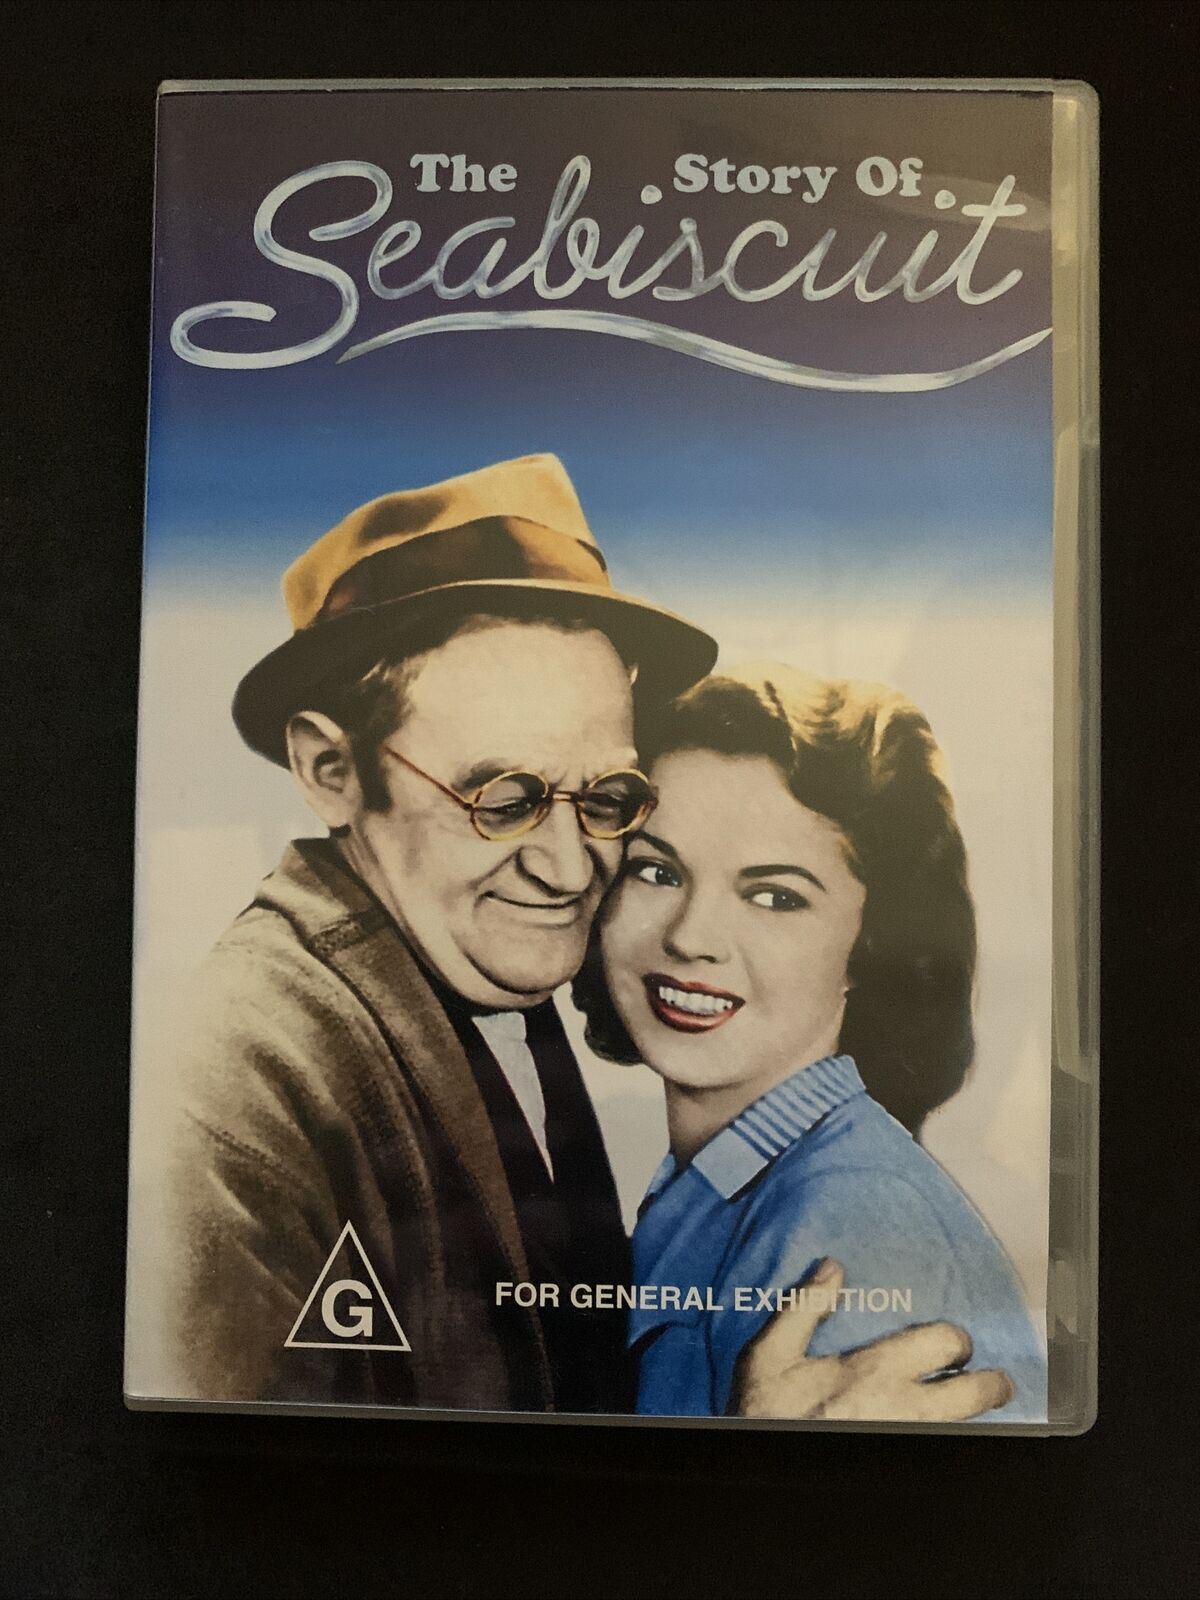 The Story Of Seabiscuit (DVD, 1949) Shirley Temple, Barry Fitzgerald. All Region